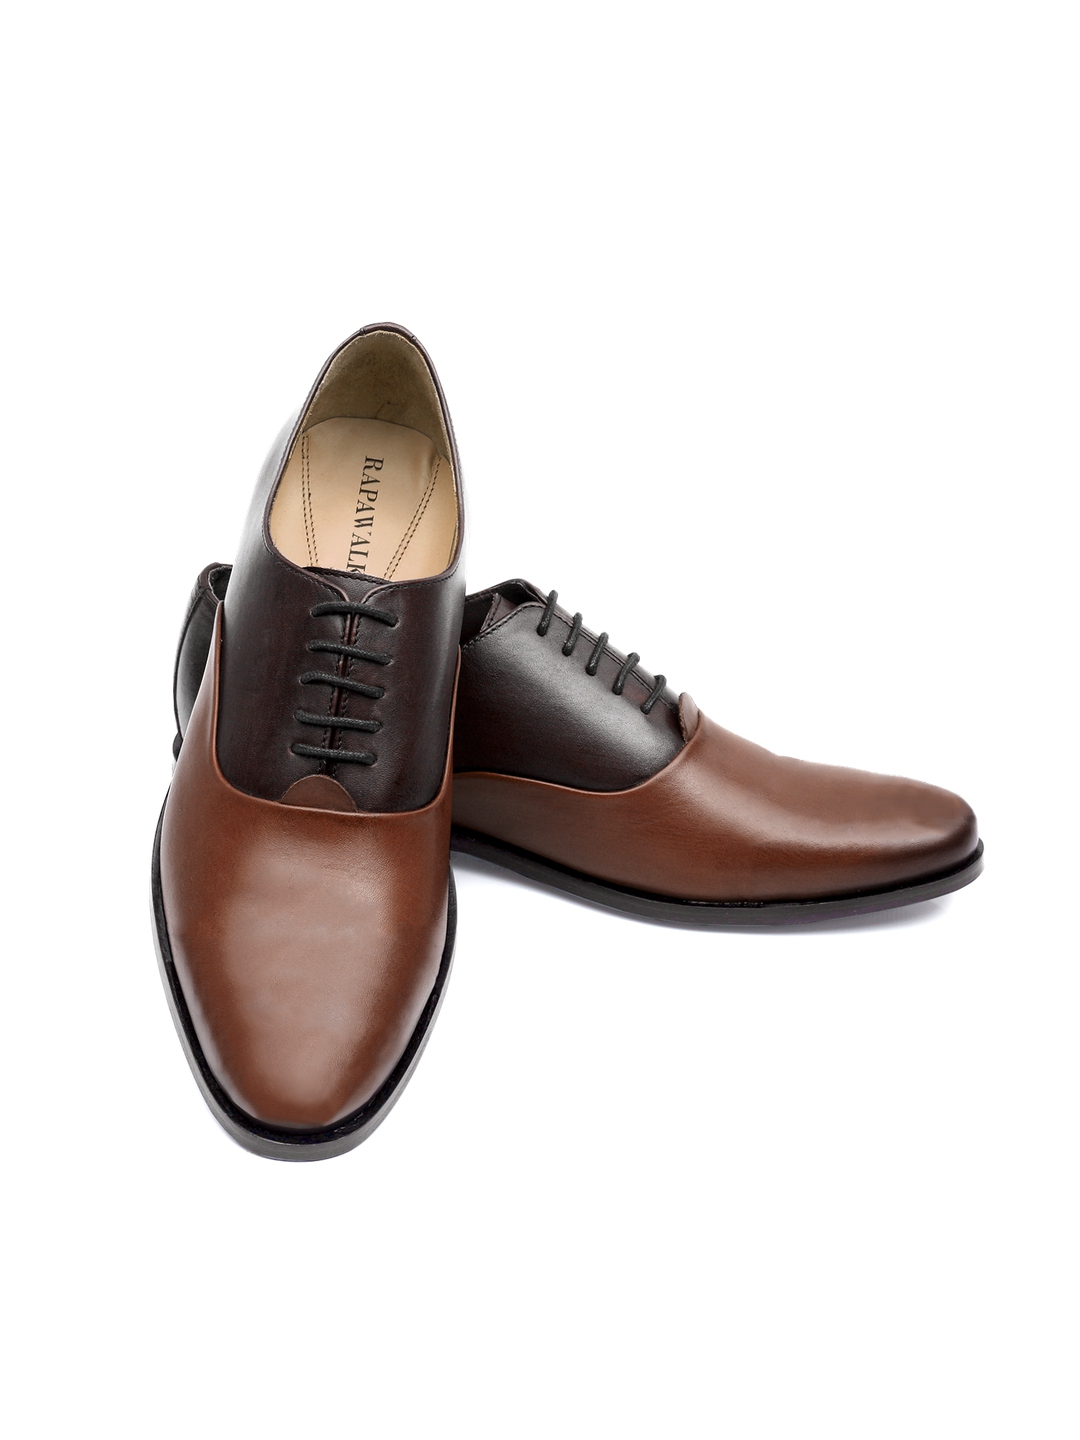 Brown and Coffee Brown Premium Plain Oxford leather shoes for men | Rapawalk